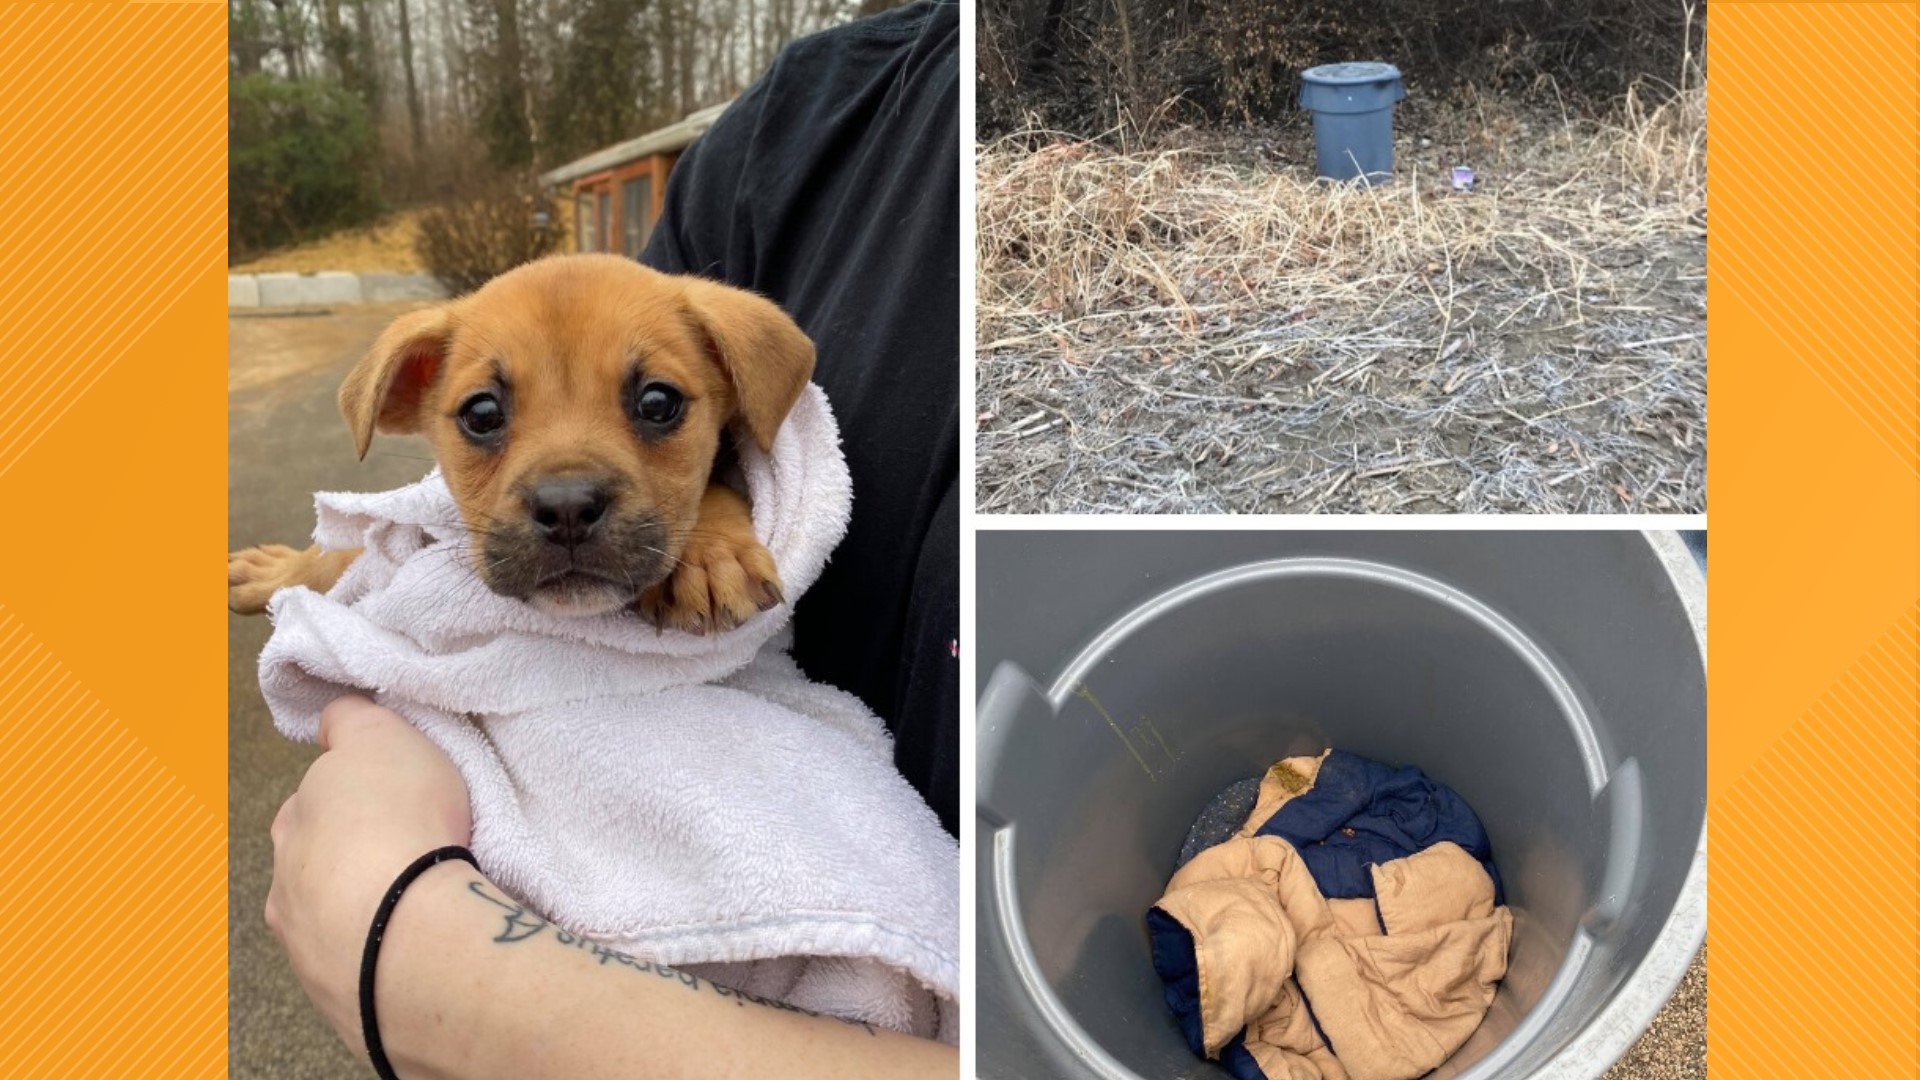 The Metro East Humane Society said it is unclear how long the puppy was kept in the trash can.